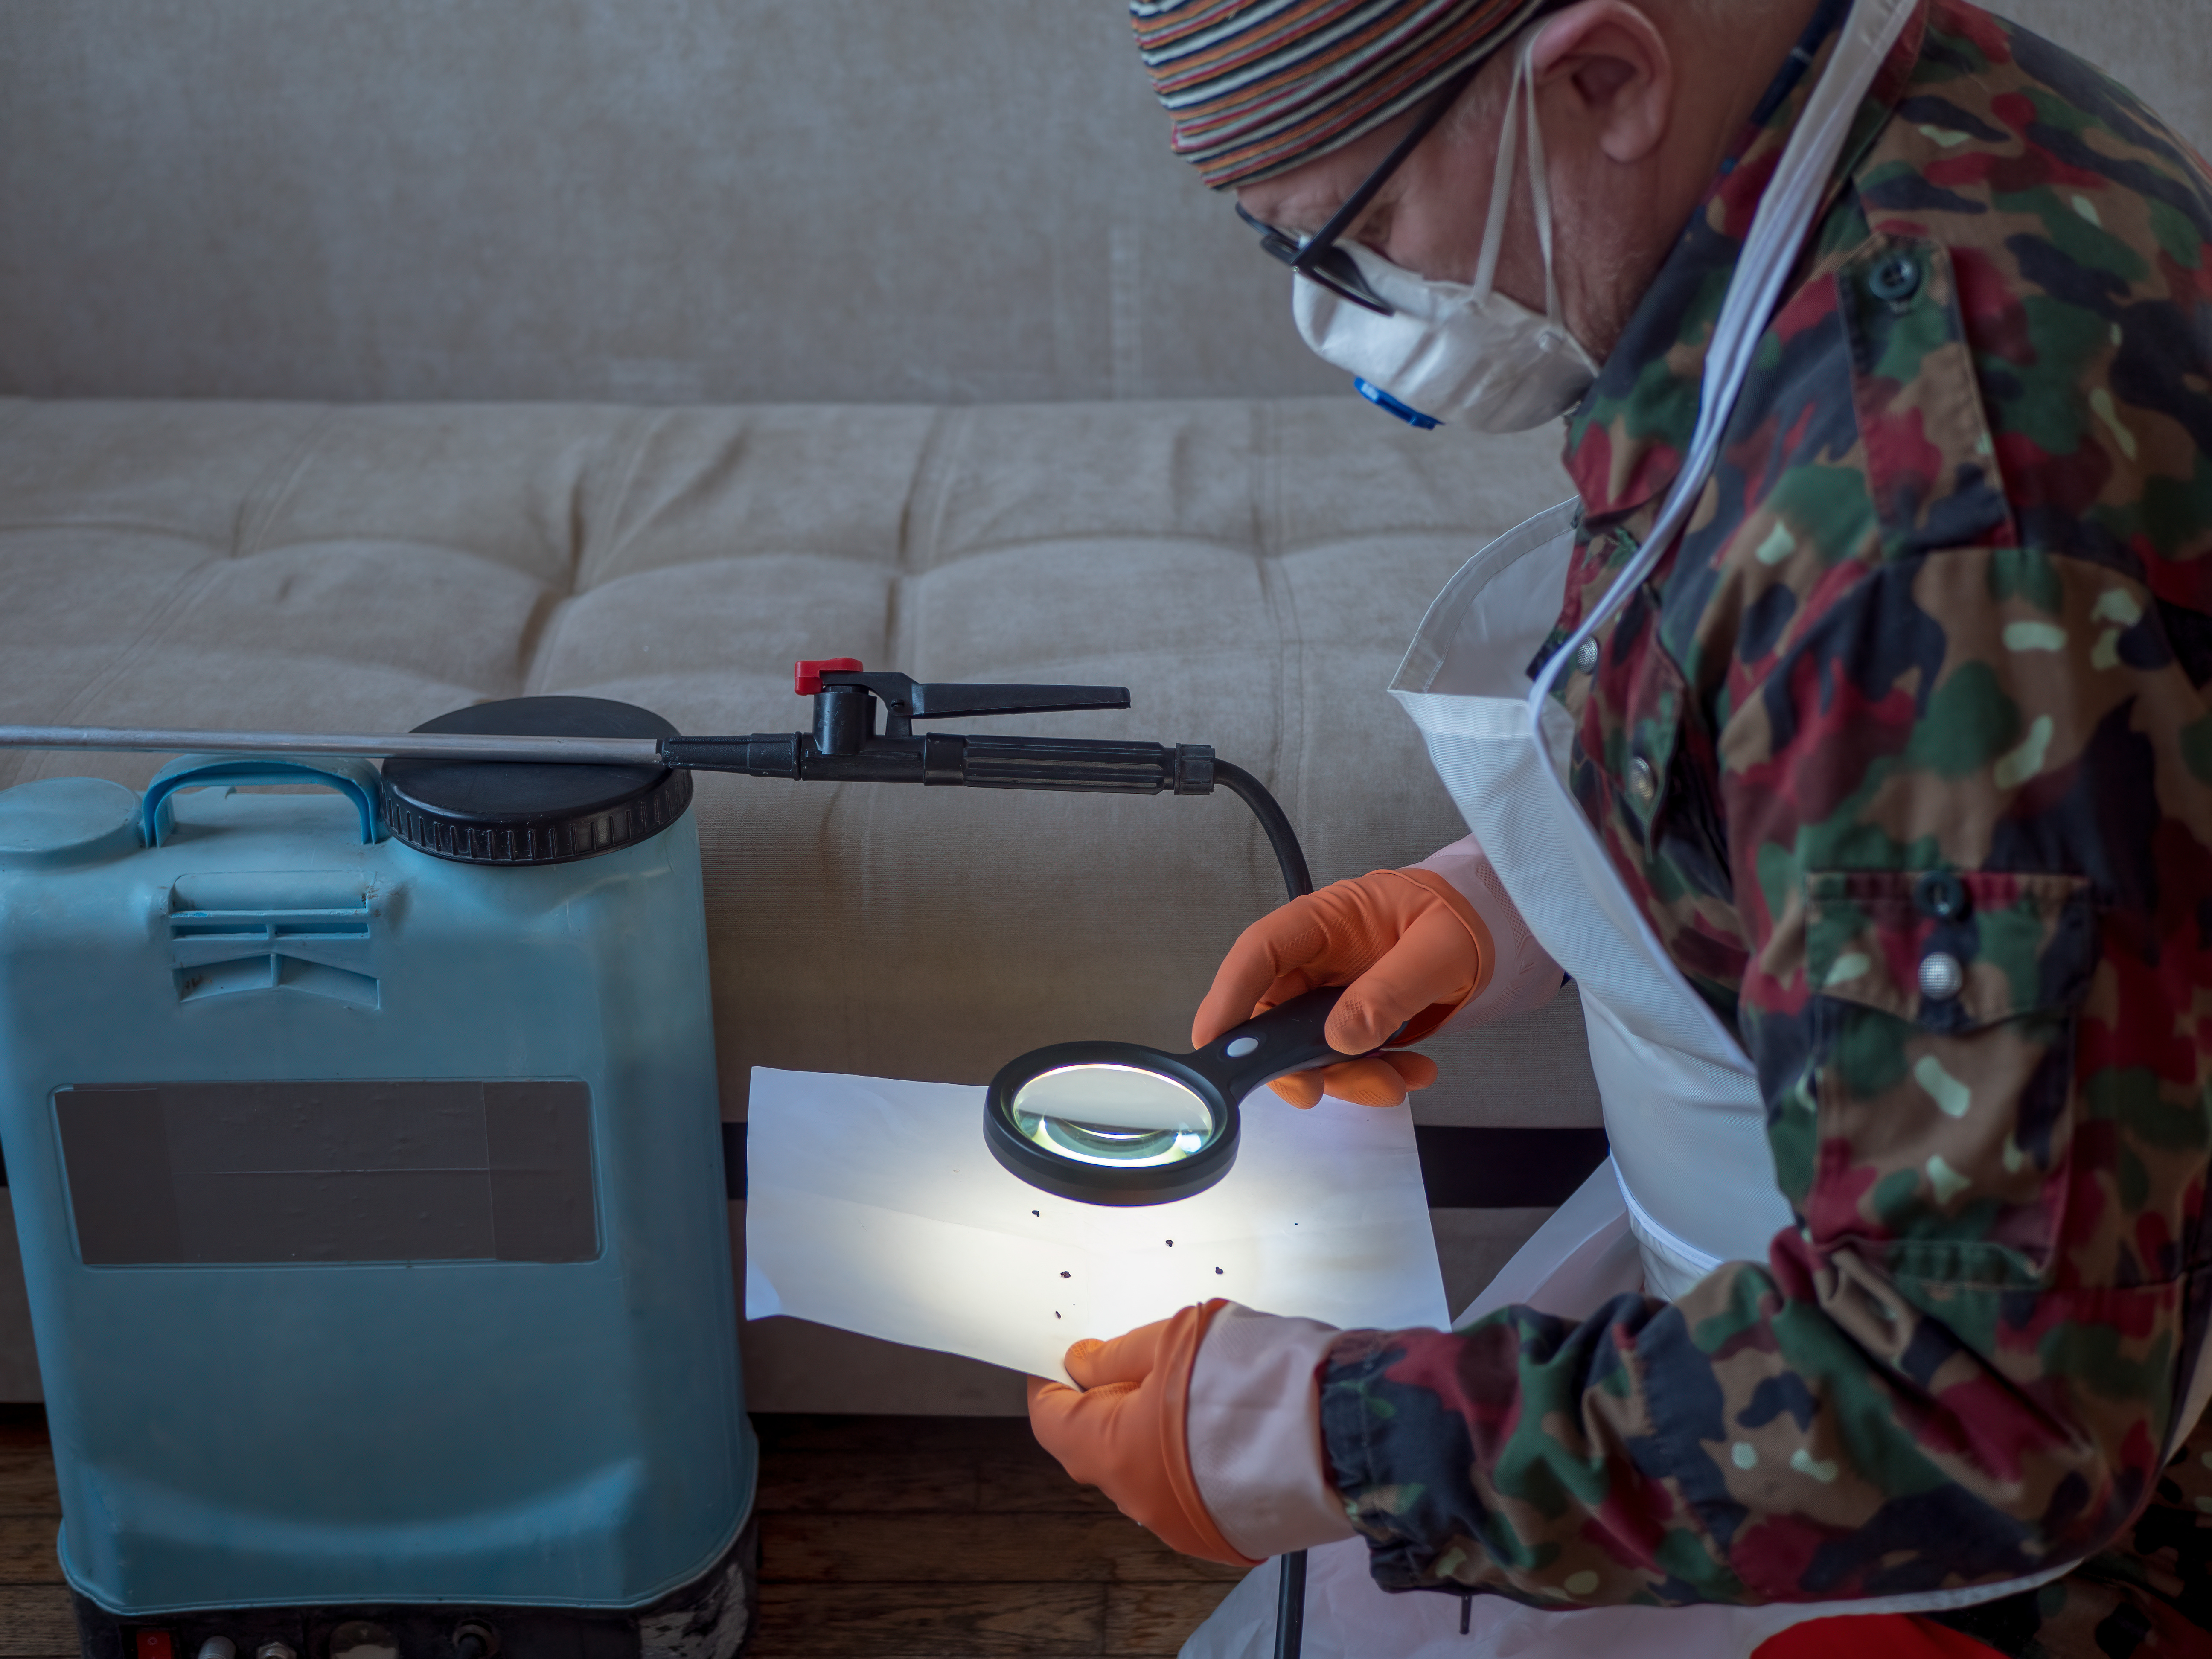 Bed bug exterminator examining paper to search for bed bug infestation